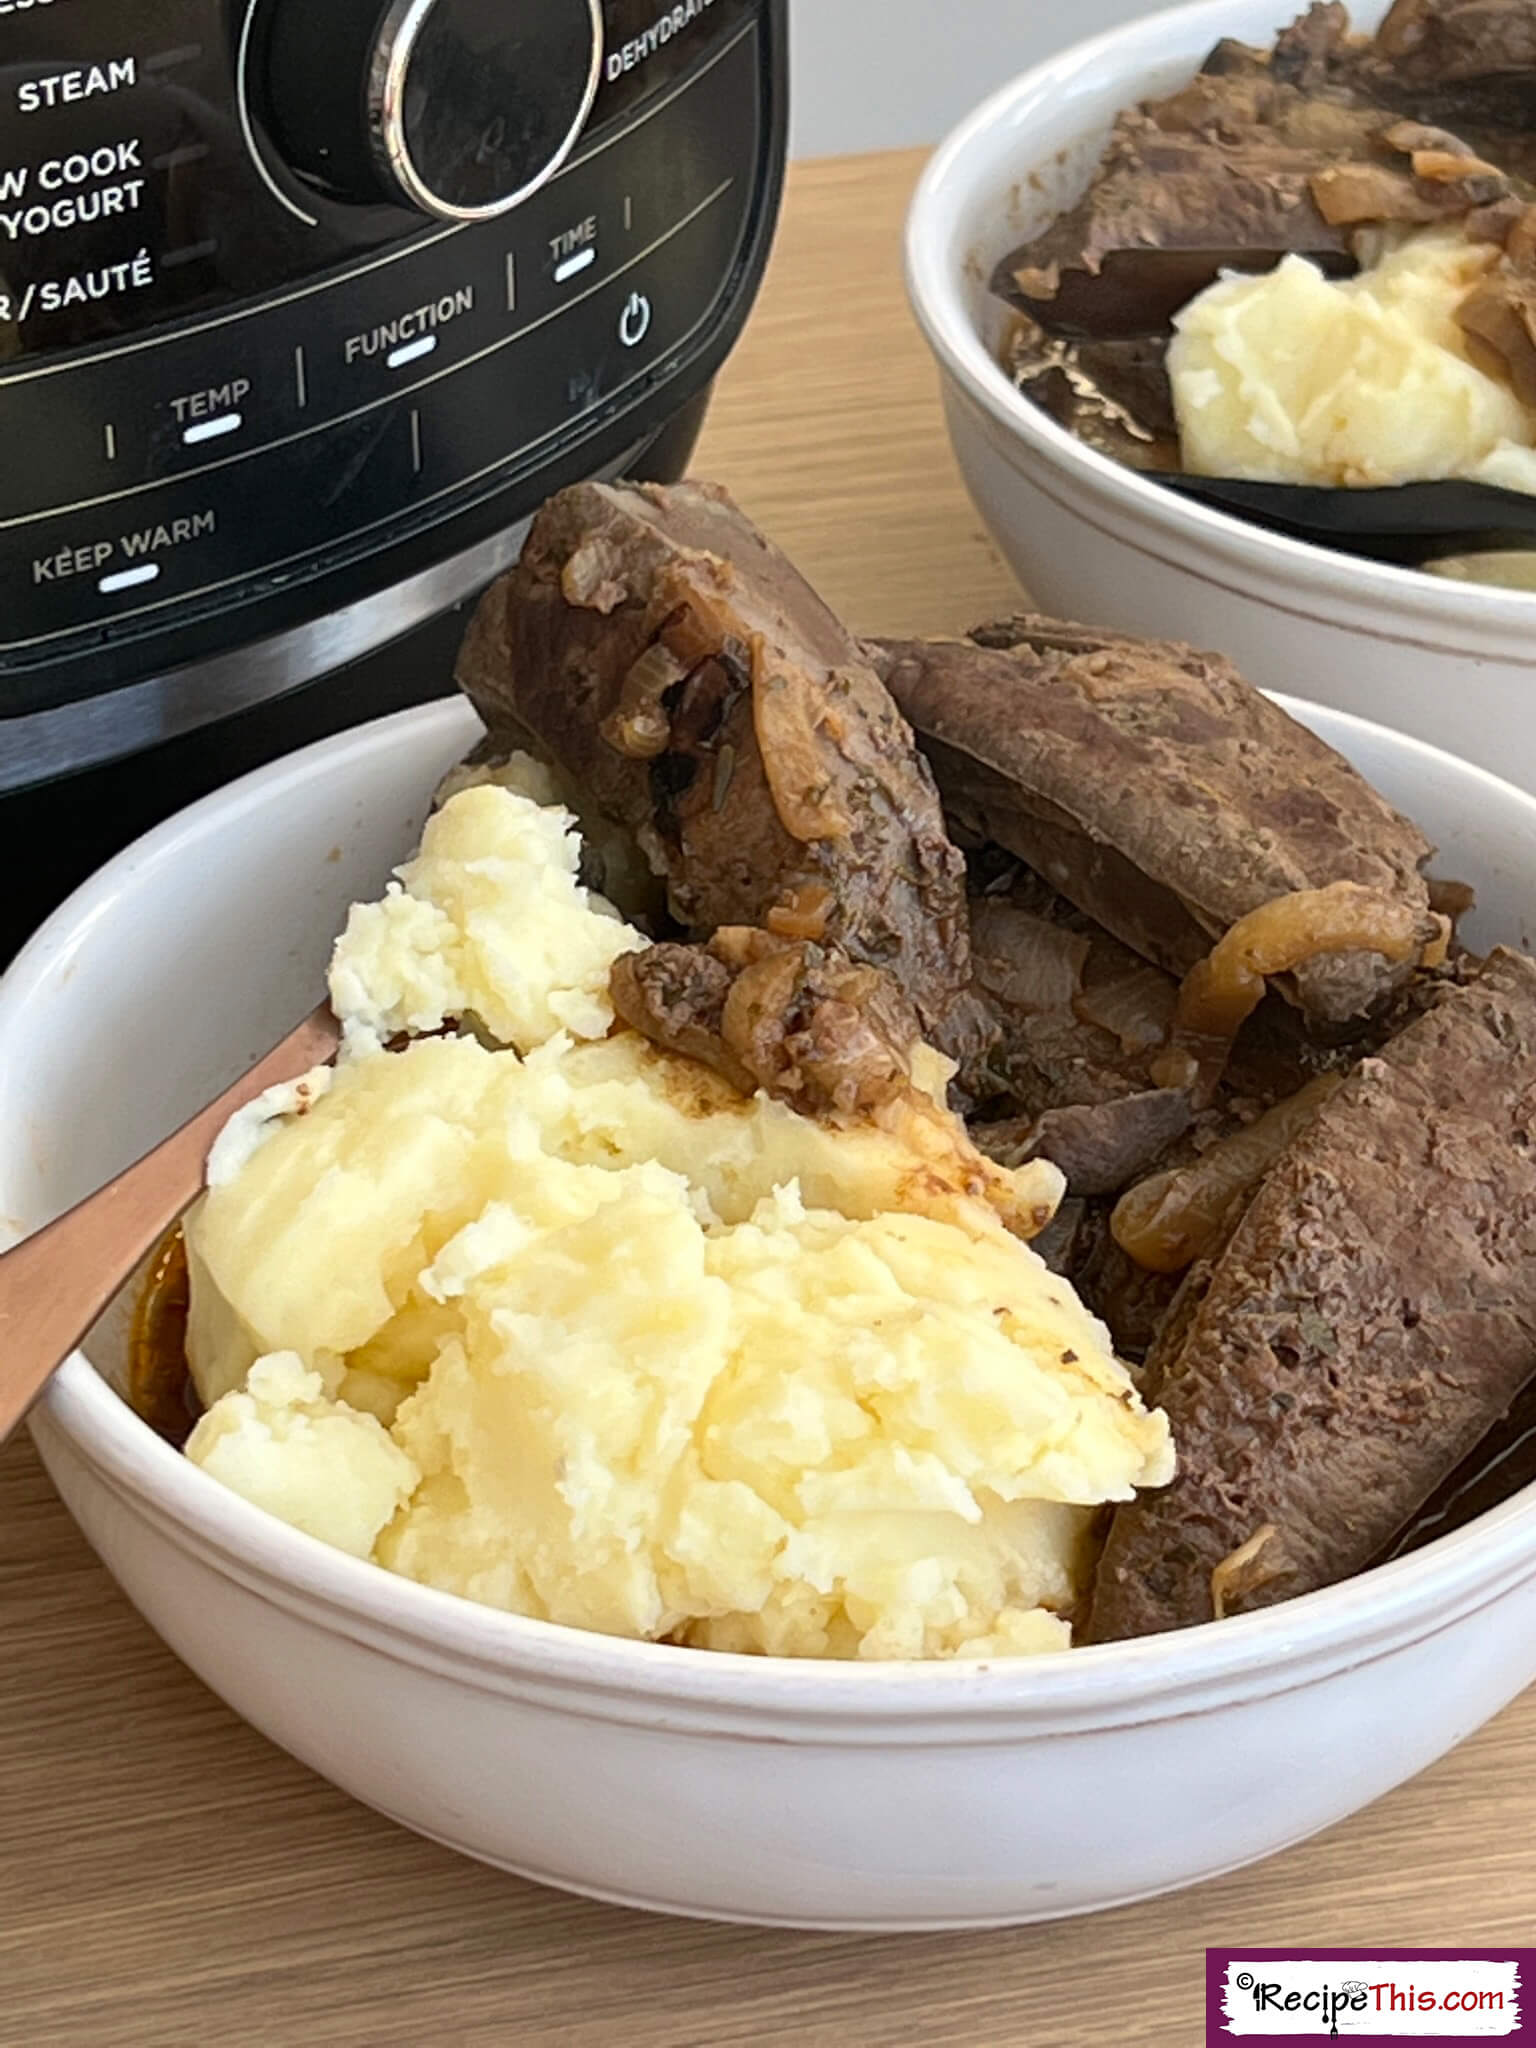 https://recipethis.com/wp-content/uploads/slow-cooker-liver-and-onions.jpg